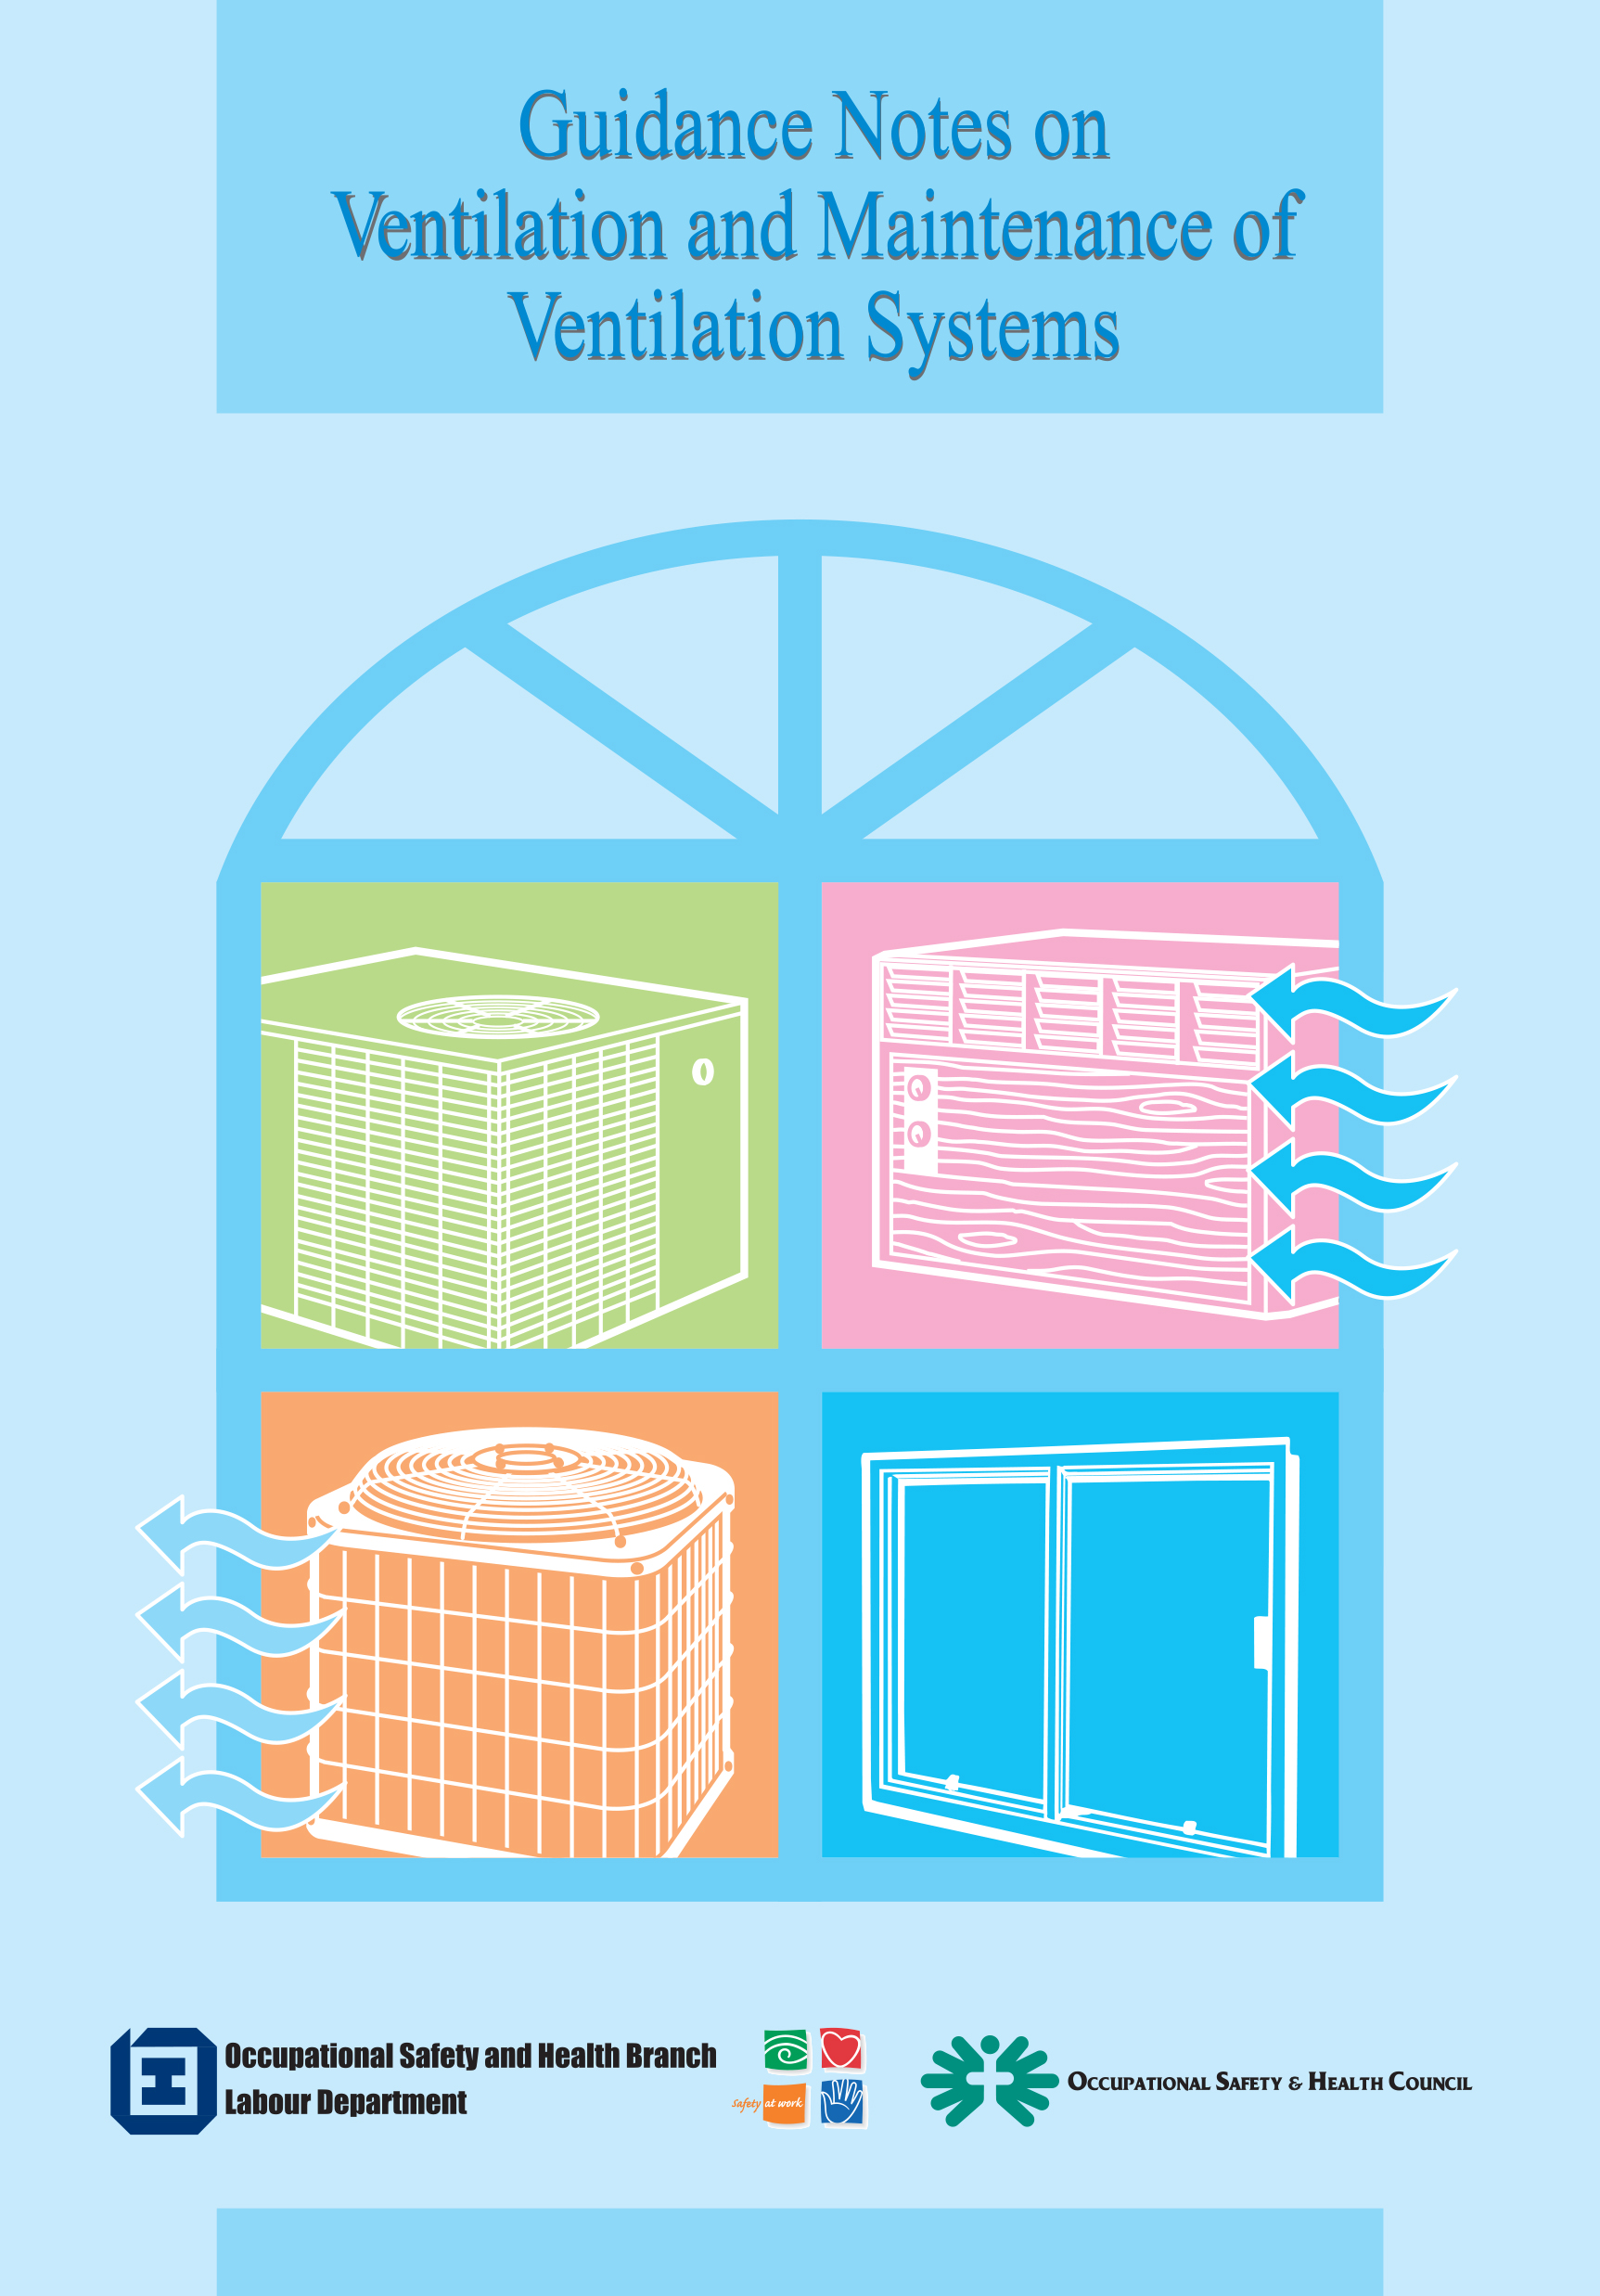 Guidance Notes on Ventilation and Maintenance of Ventilation System (published by the Labour Department)